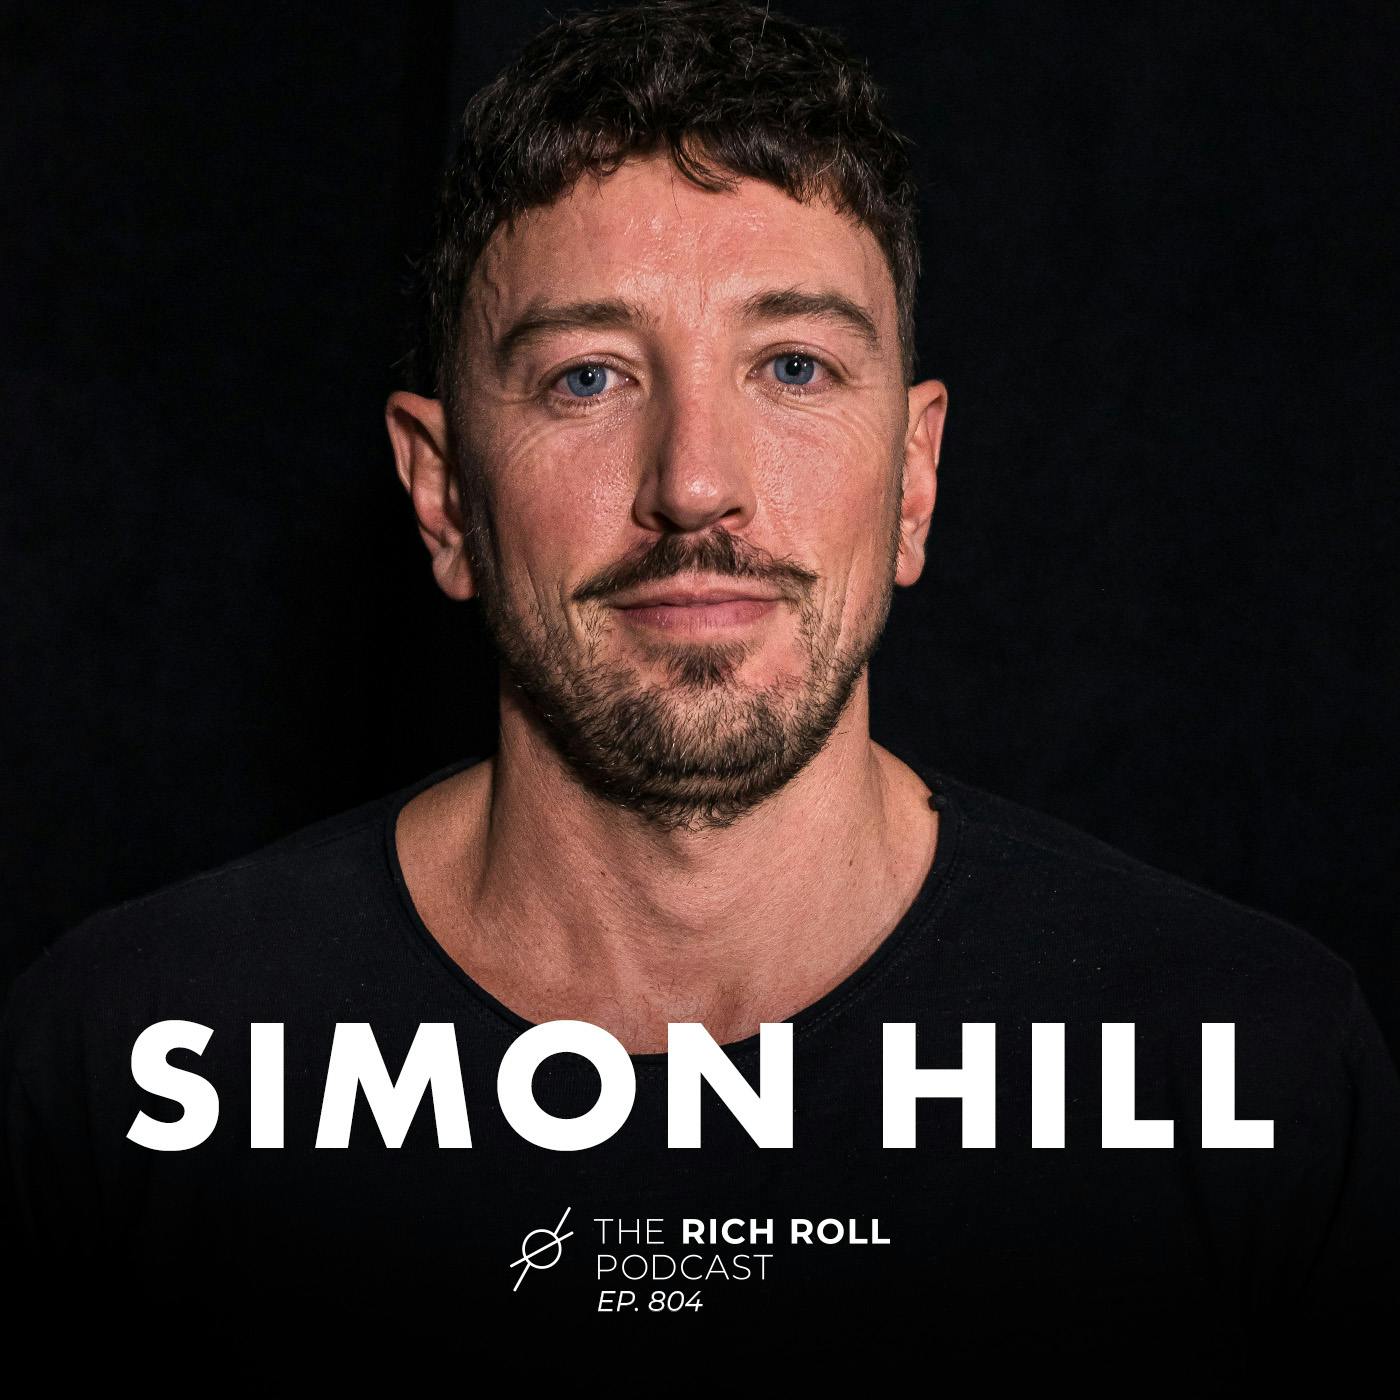 The Living Proof Challenge: Simon Hill’s 12-Week Protocol To Optimize Your Health, Fitness & Longevity